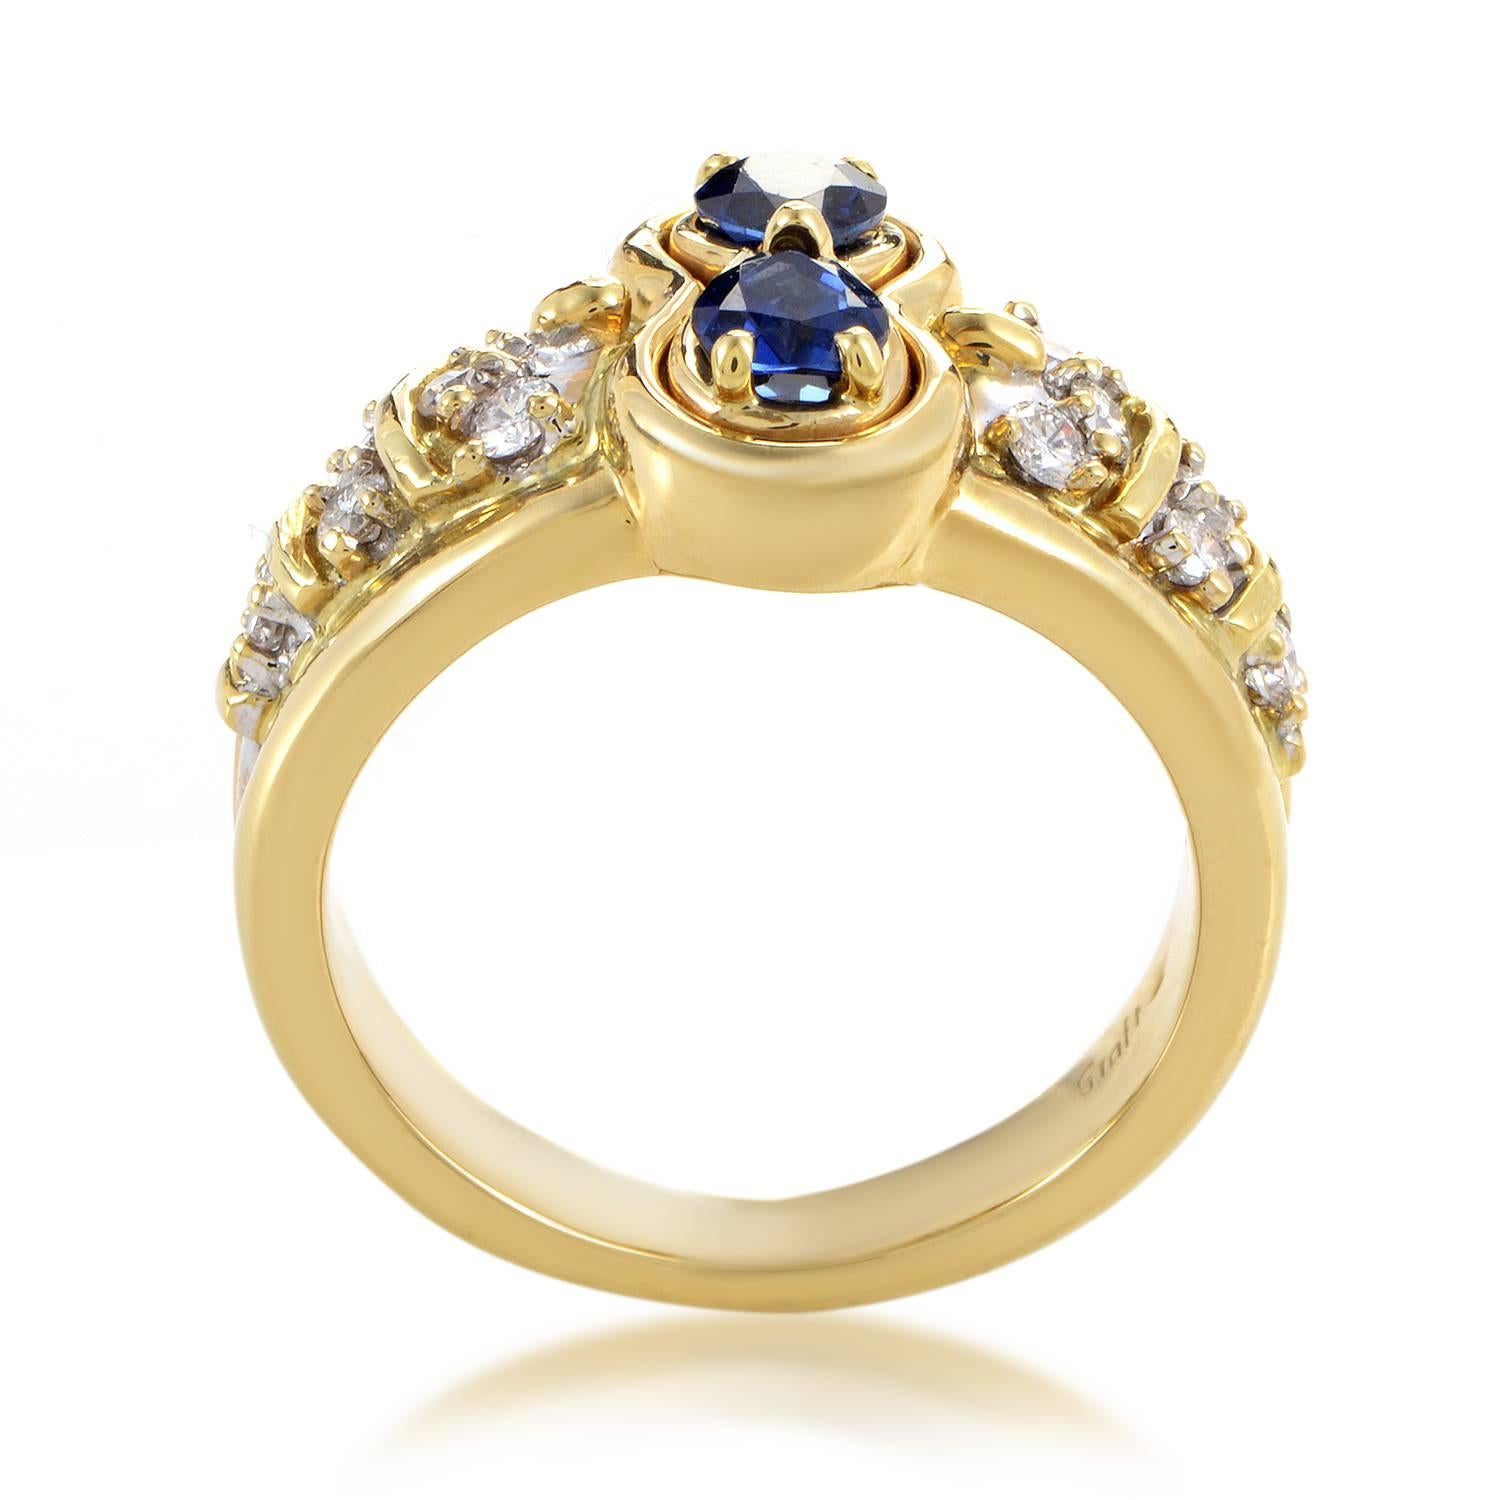 A compelling item of sophisticated design and exceptional luxurious allure, this stunning ring from Graff is made of gleaming 18K yellow gold and embellished with 0.55ct of diamonds, while regal sapphires on top weigh in total approximately 2.00